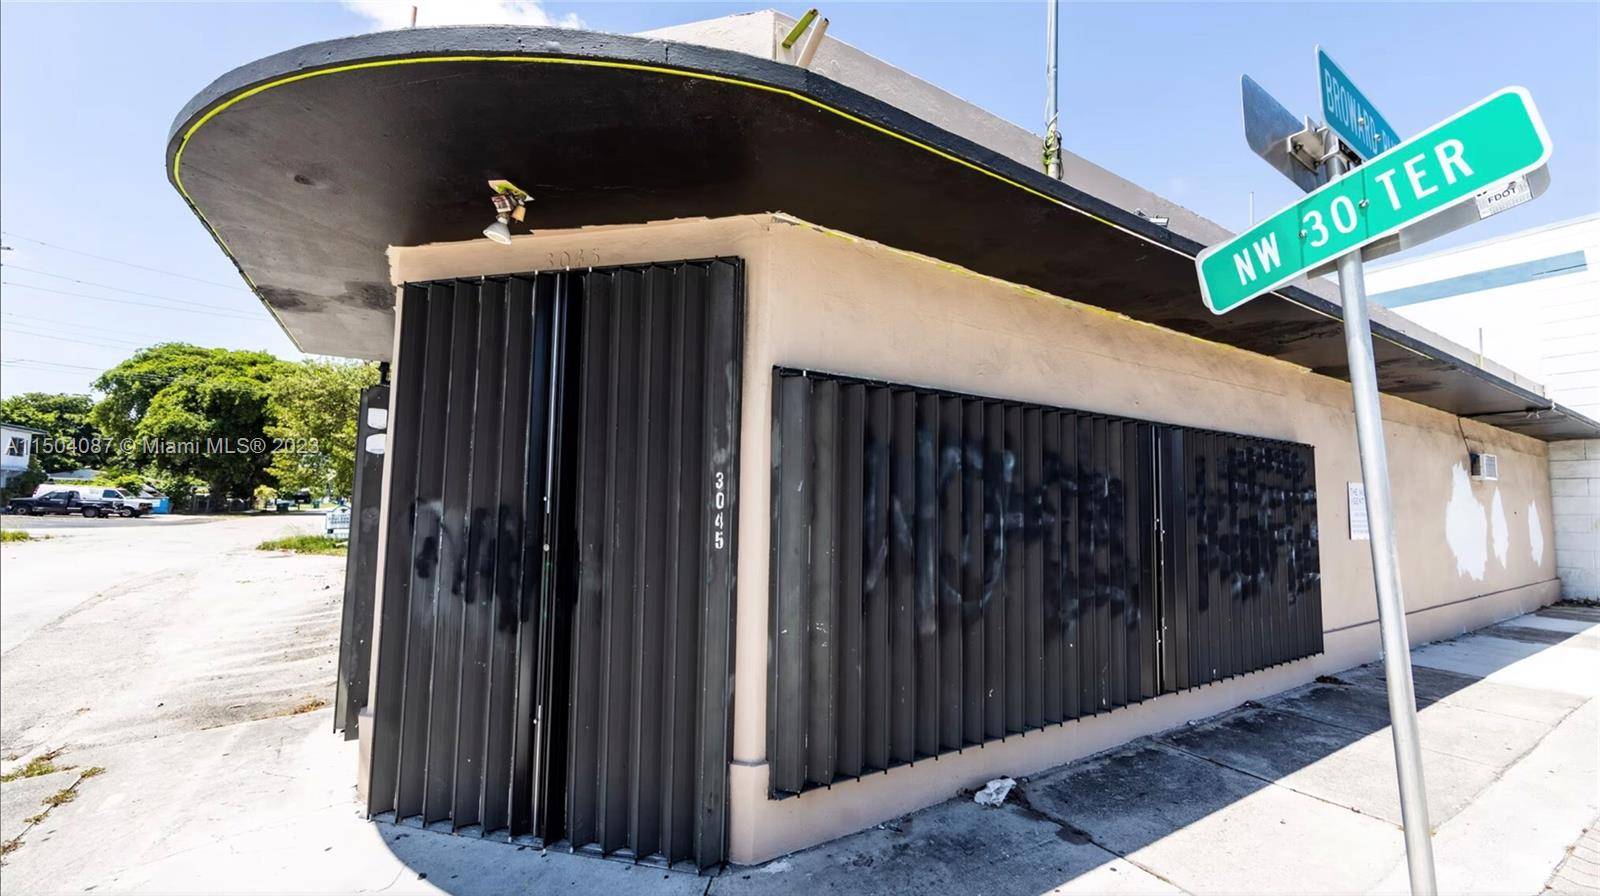 The subject property is a freestanding vacant retail building consisting of 3, 664 square feet of usable space, well situated on a 7, 202 square foot lot.